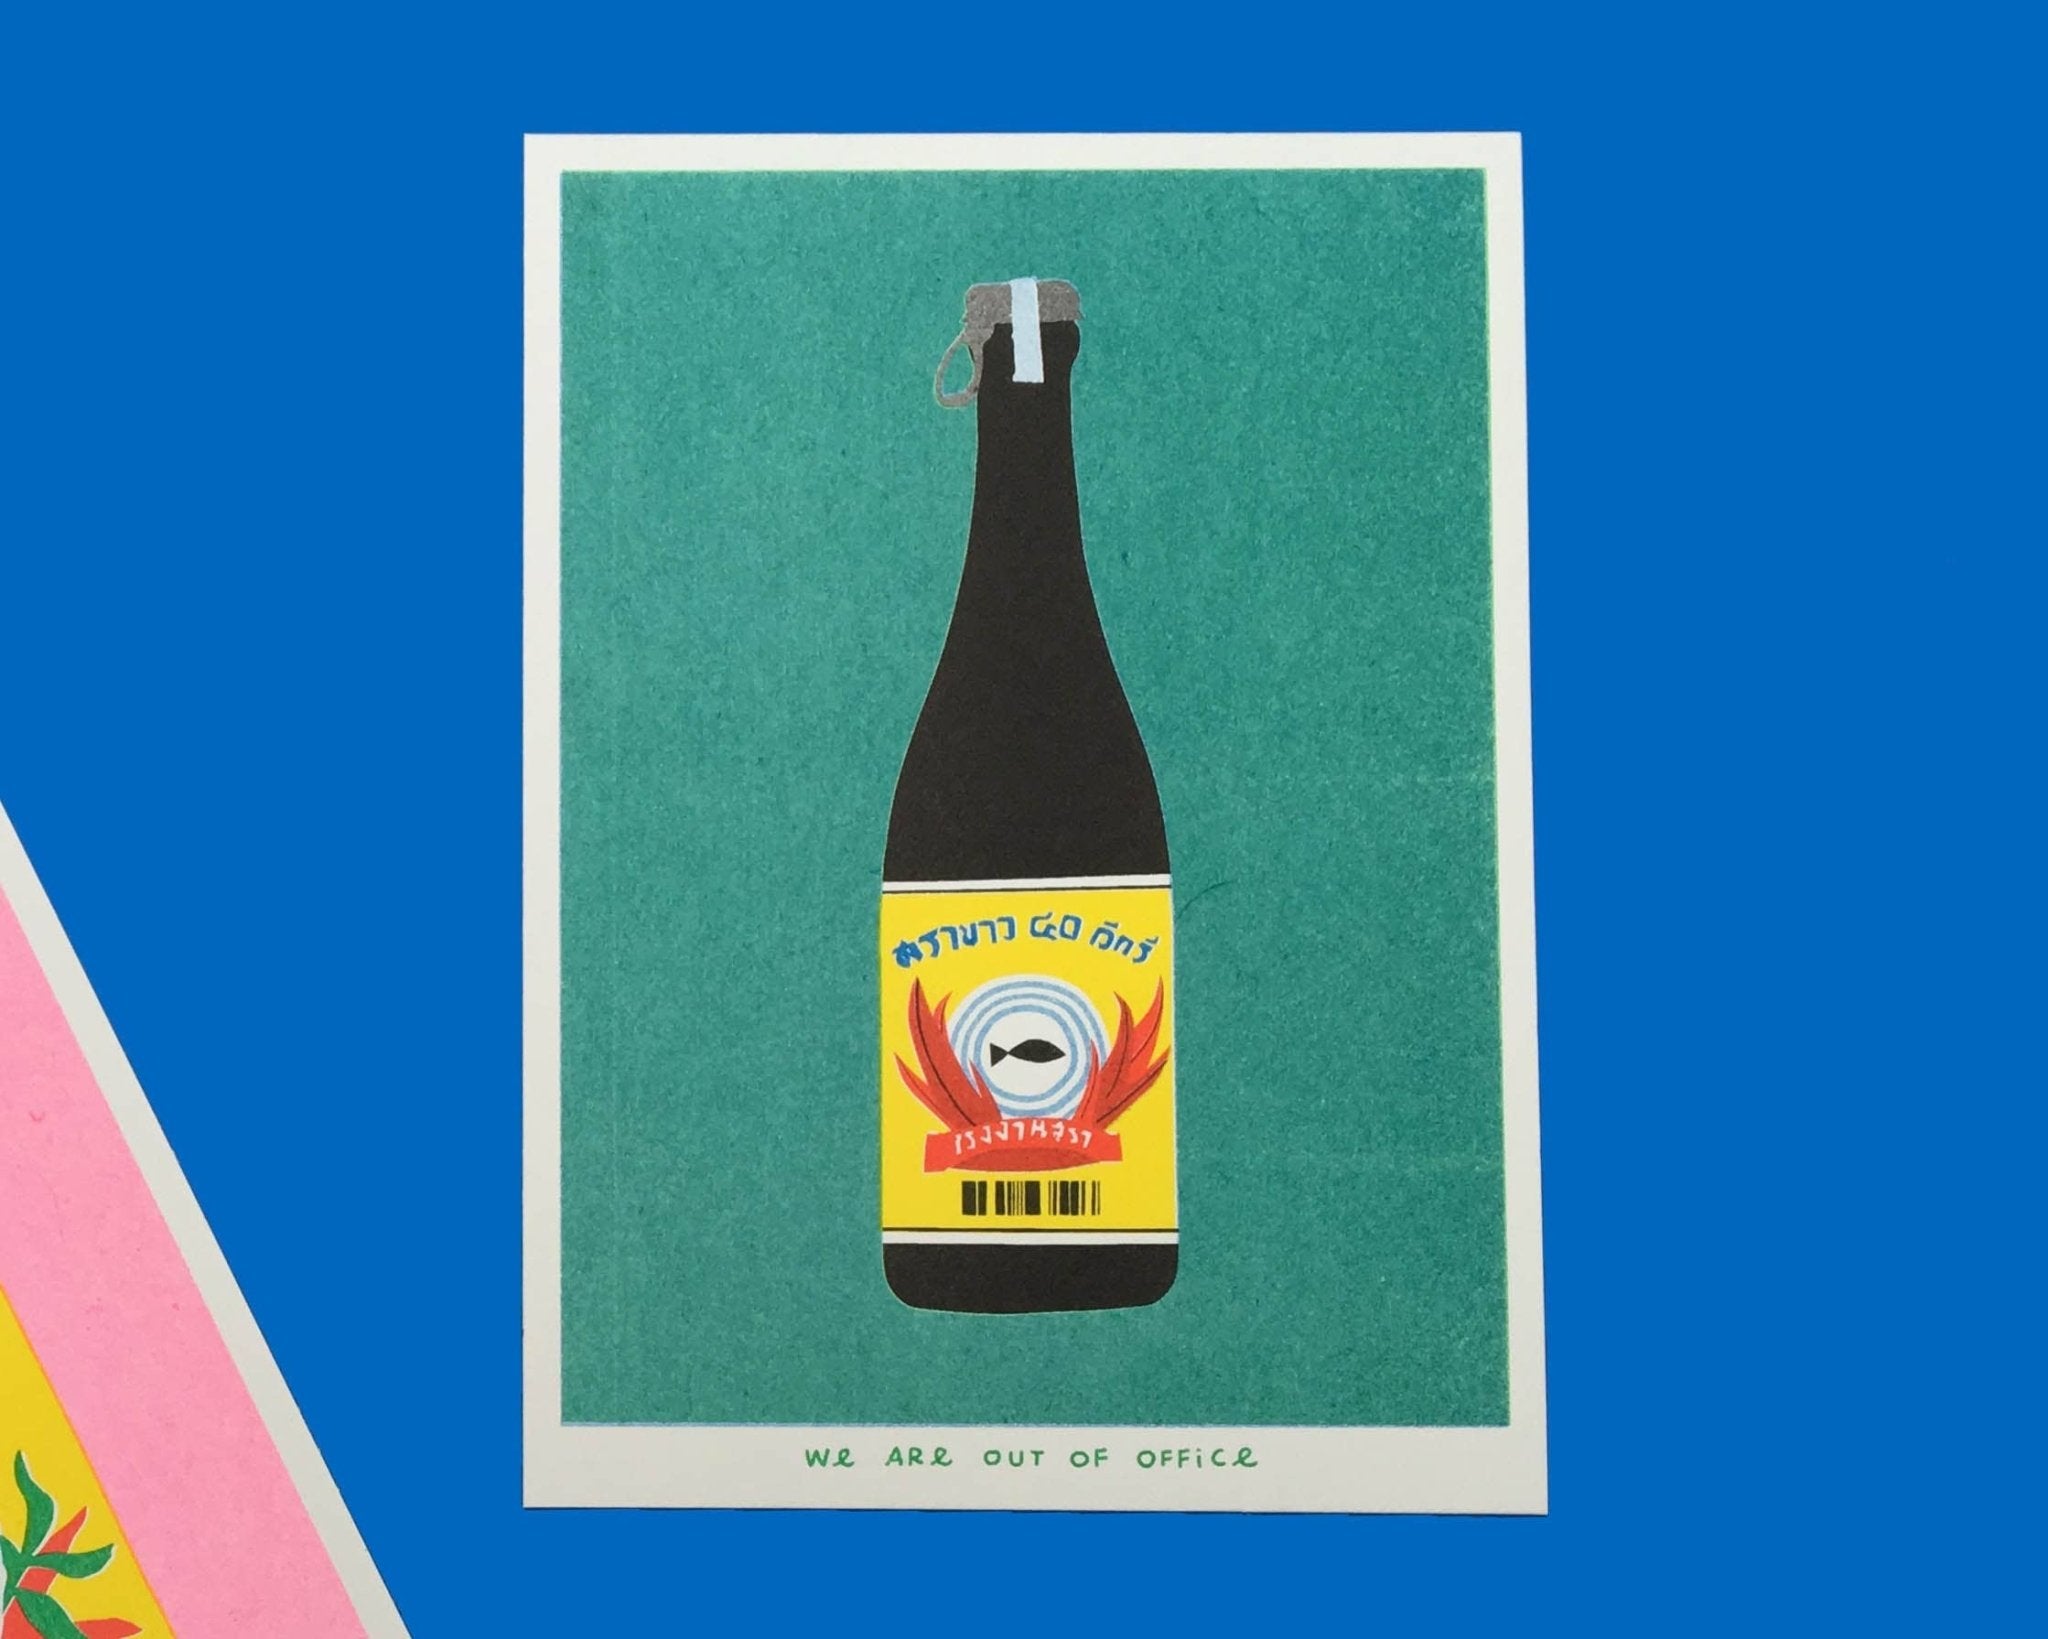 We Are Out of Office - A Risograph Print of a Thai Bottle of Booze - Ensemble Studios